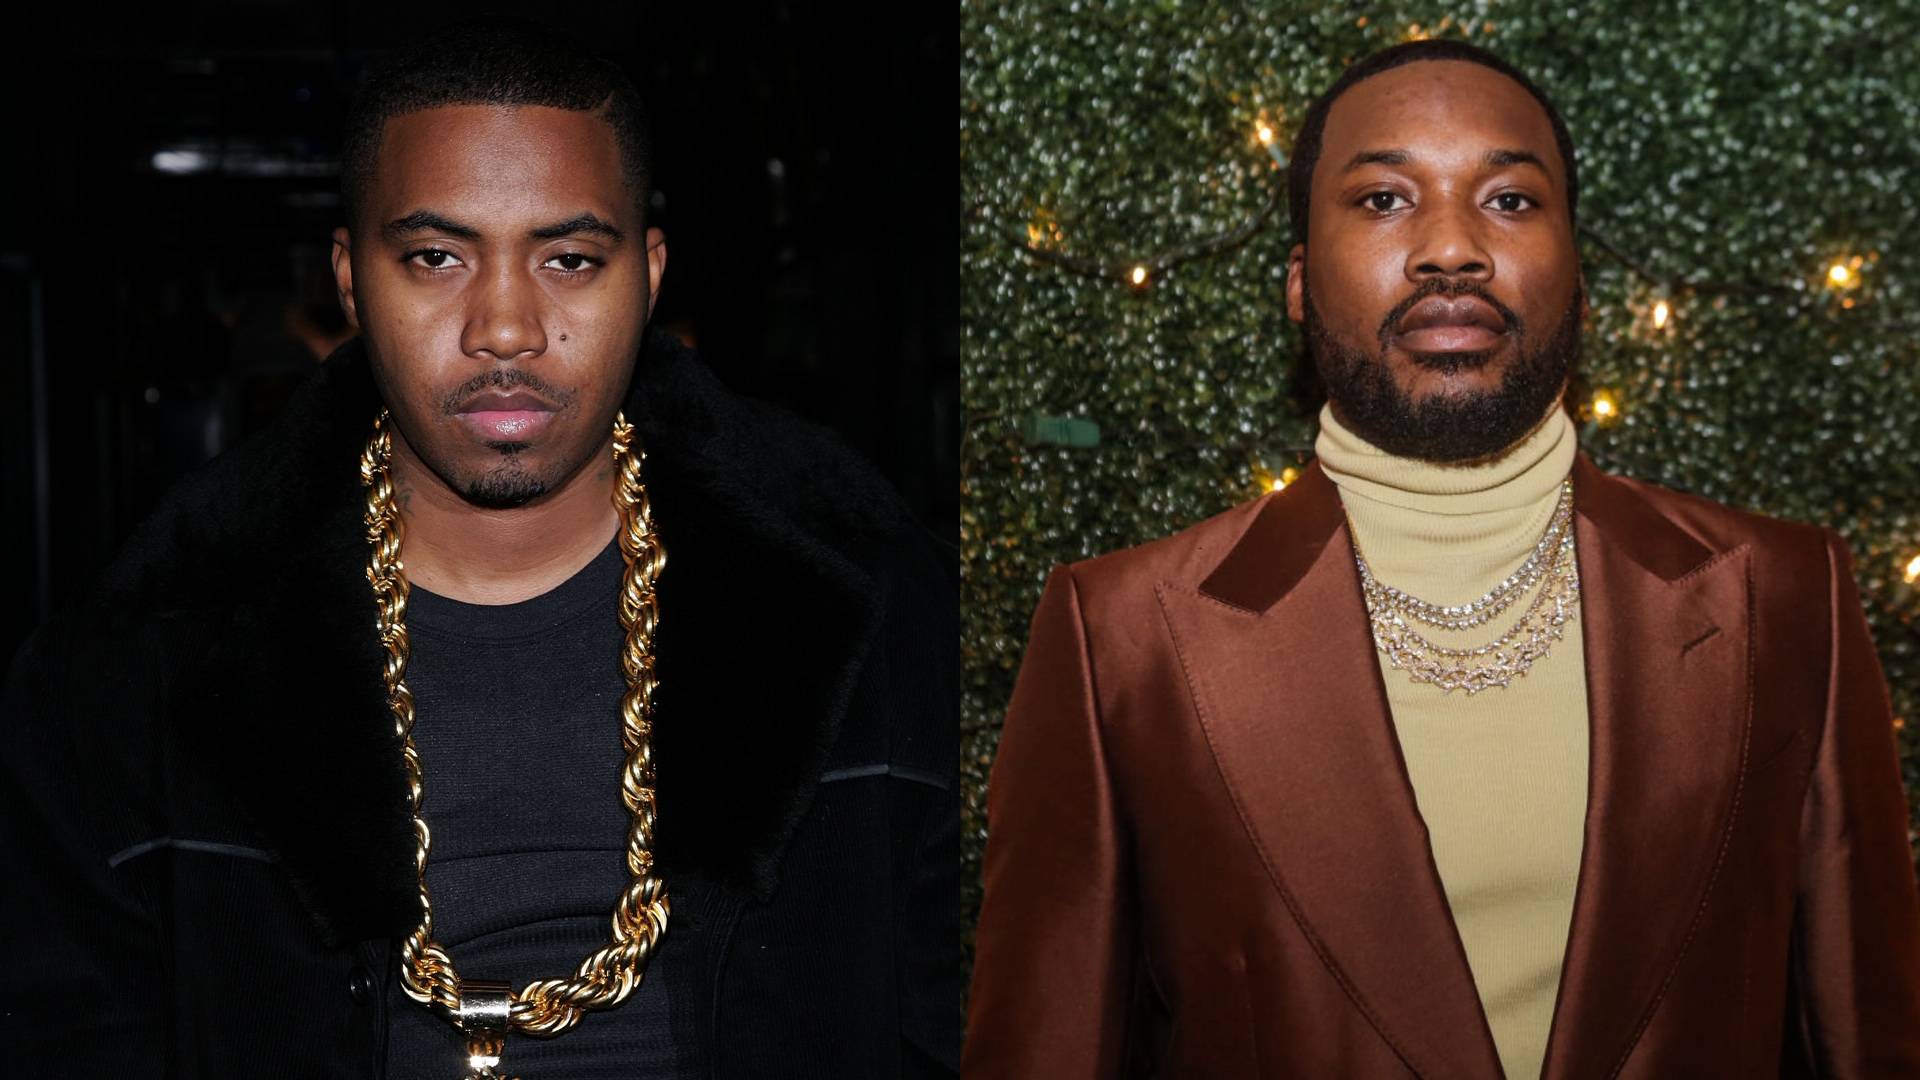 Nas and Meek Mill on BET Buzz 2020.